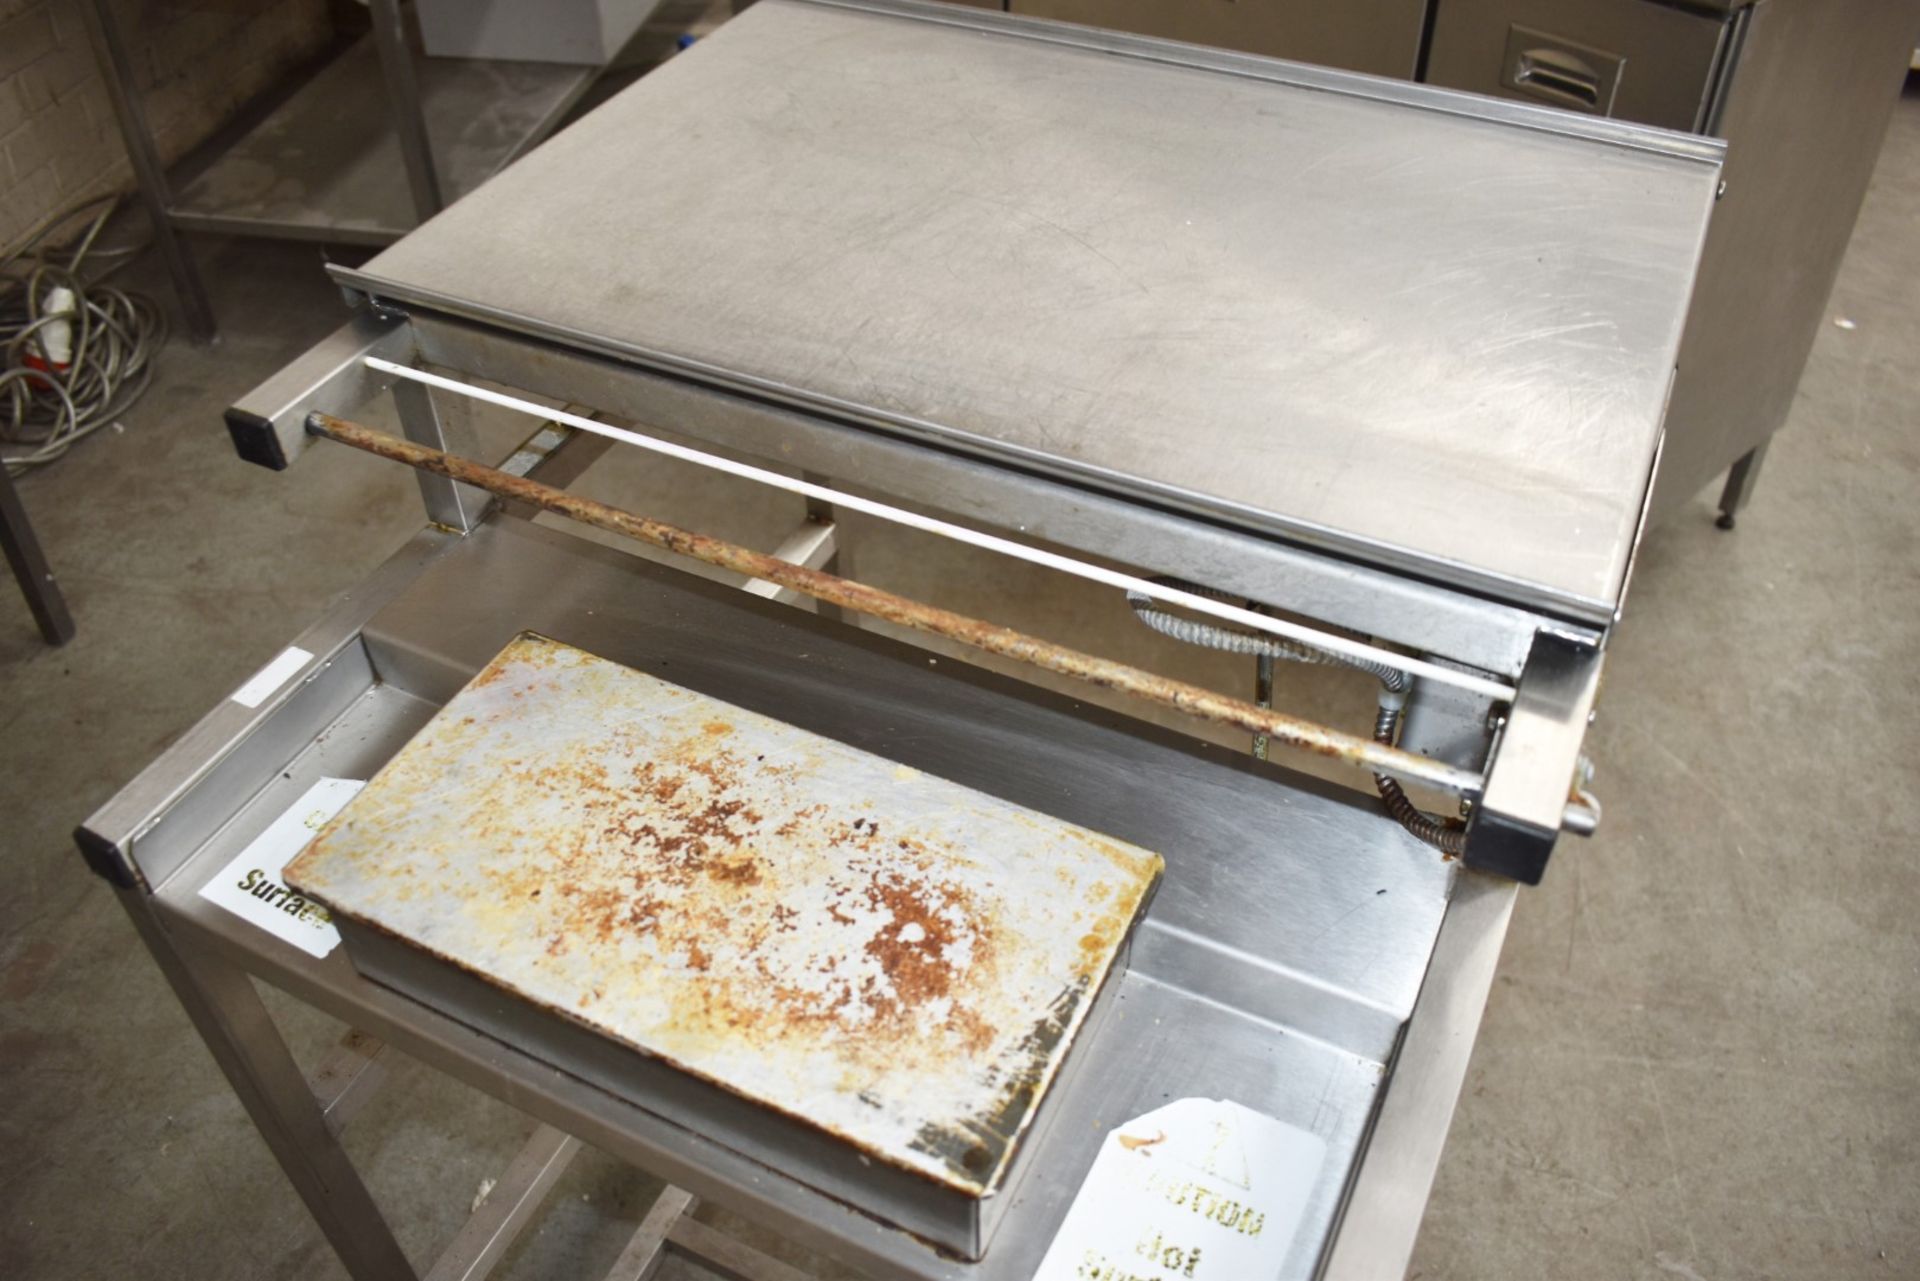 1 x Food Tray Wrapper Unit For Heat Sealed Wrapping - Dimensions: W56 cms - 240v - Ref: CAM112 WH4 - - Image 2 of 5